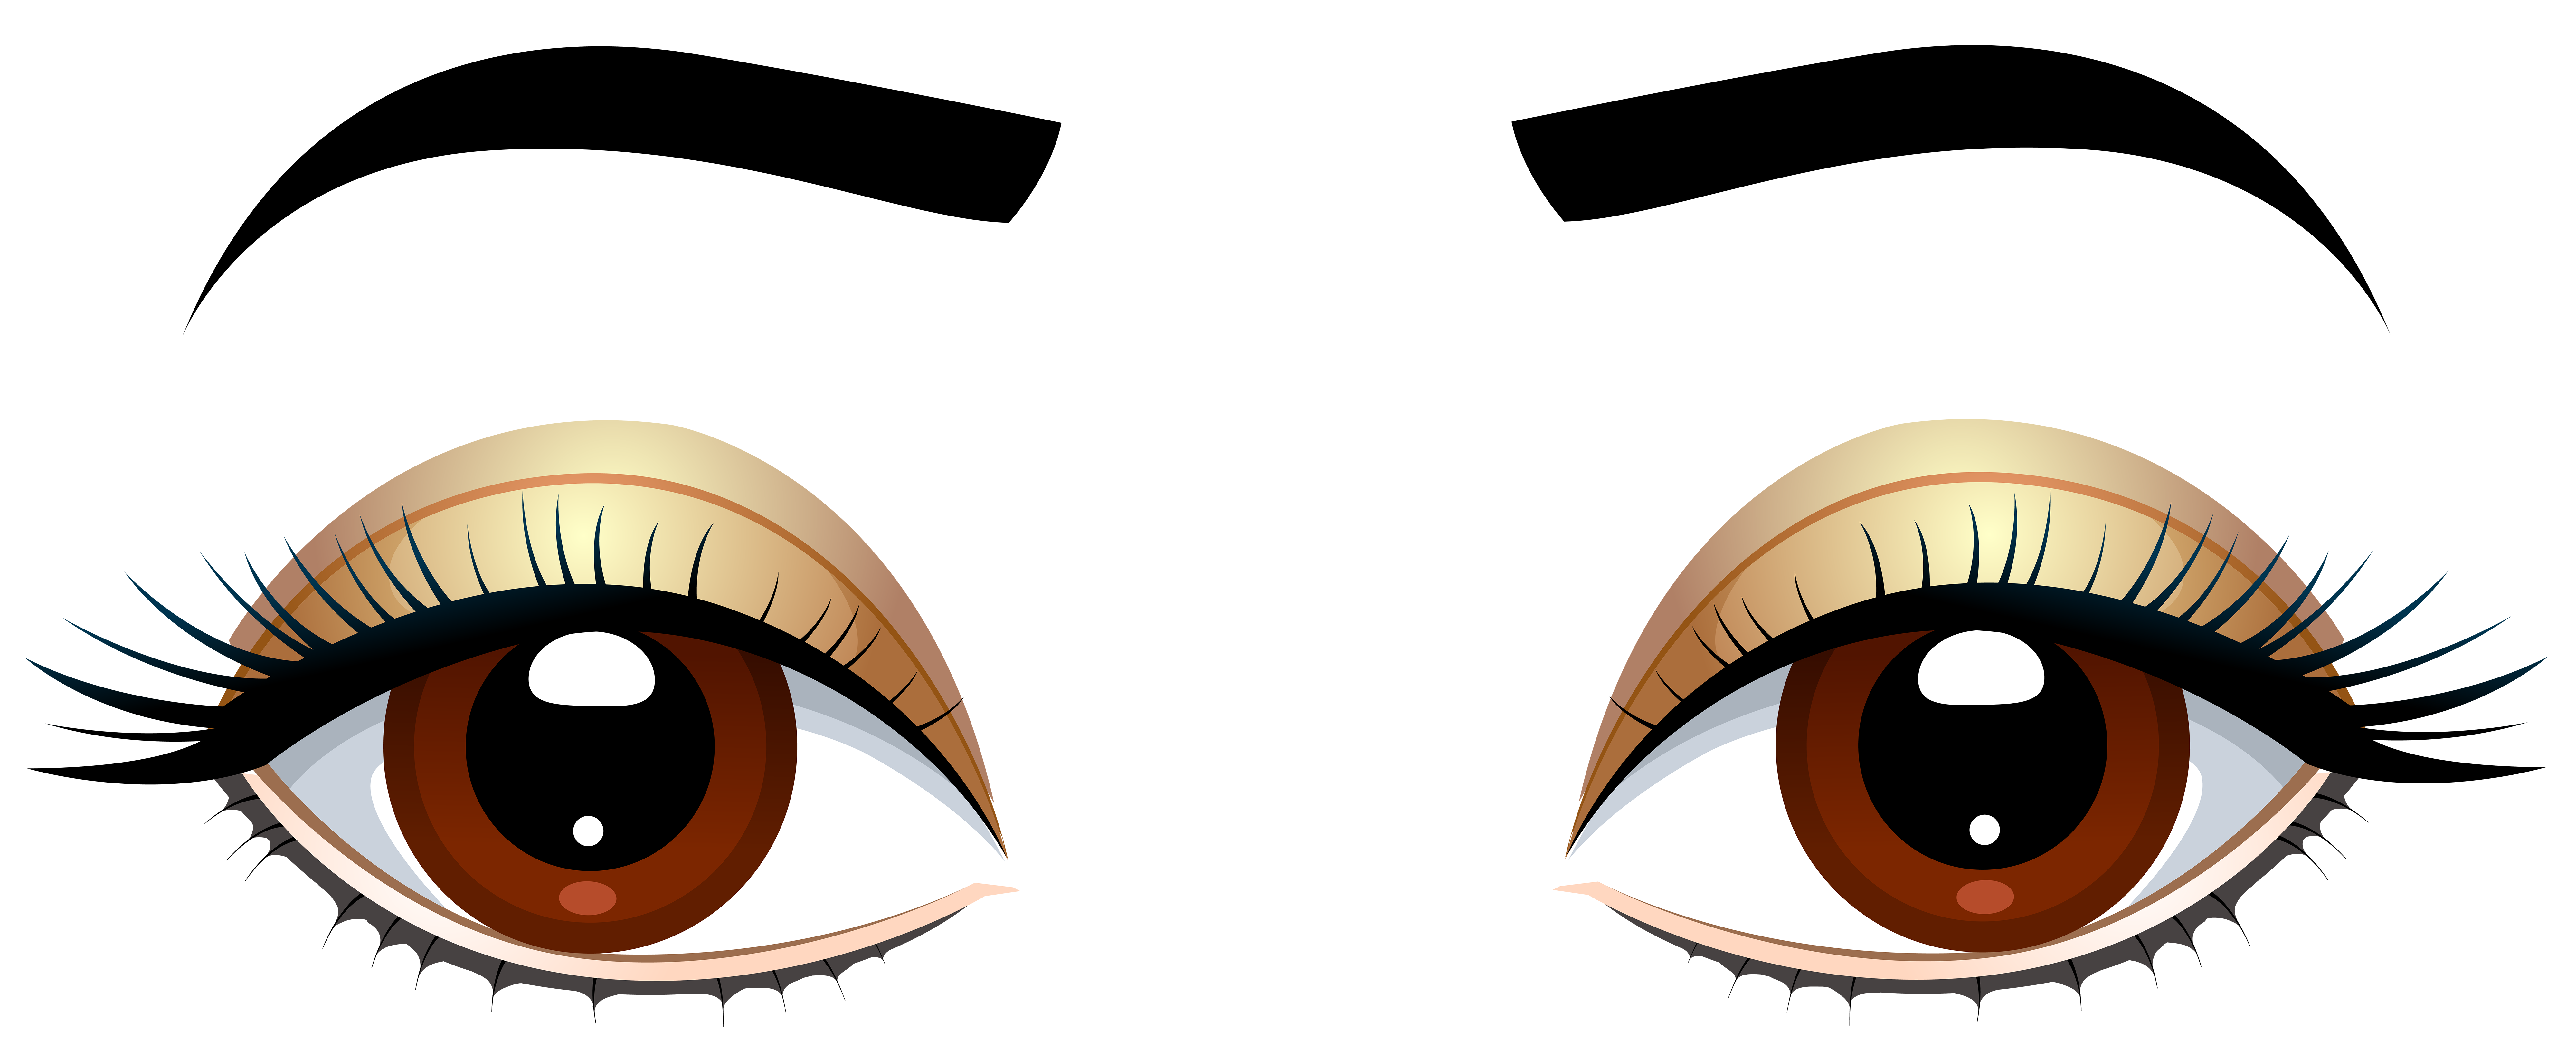 Girly clipart eye. Brown eyes with eyebrows